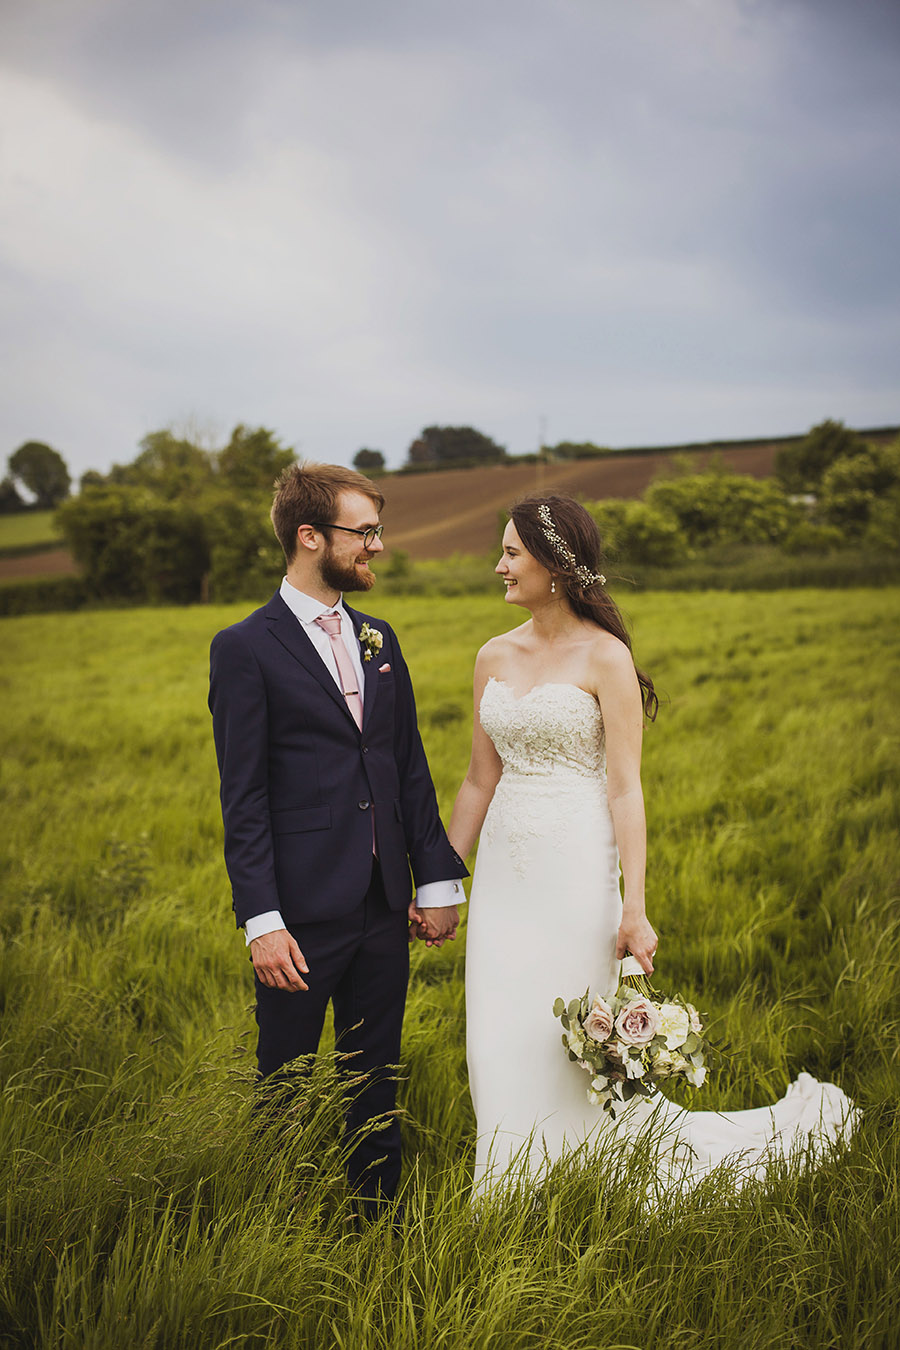 Relaxed outdoor wedding at Cott Farm Barn with images by Heather Birnie Photography on the English Wedding Blog (43)